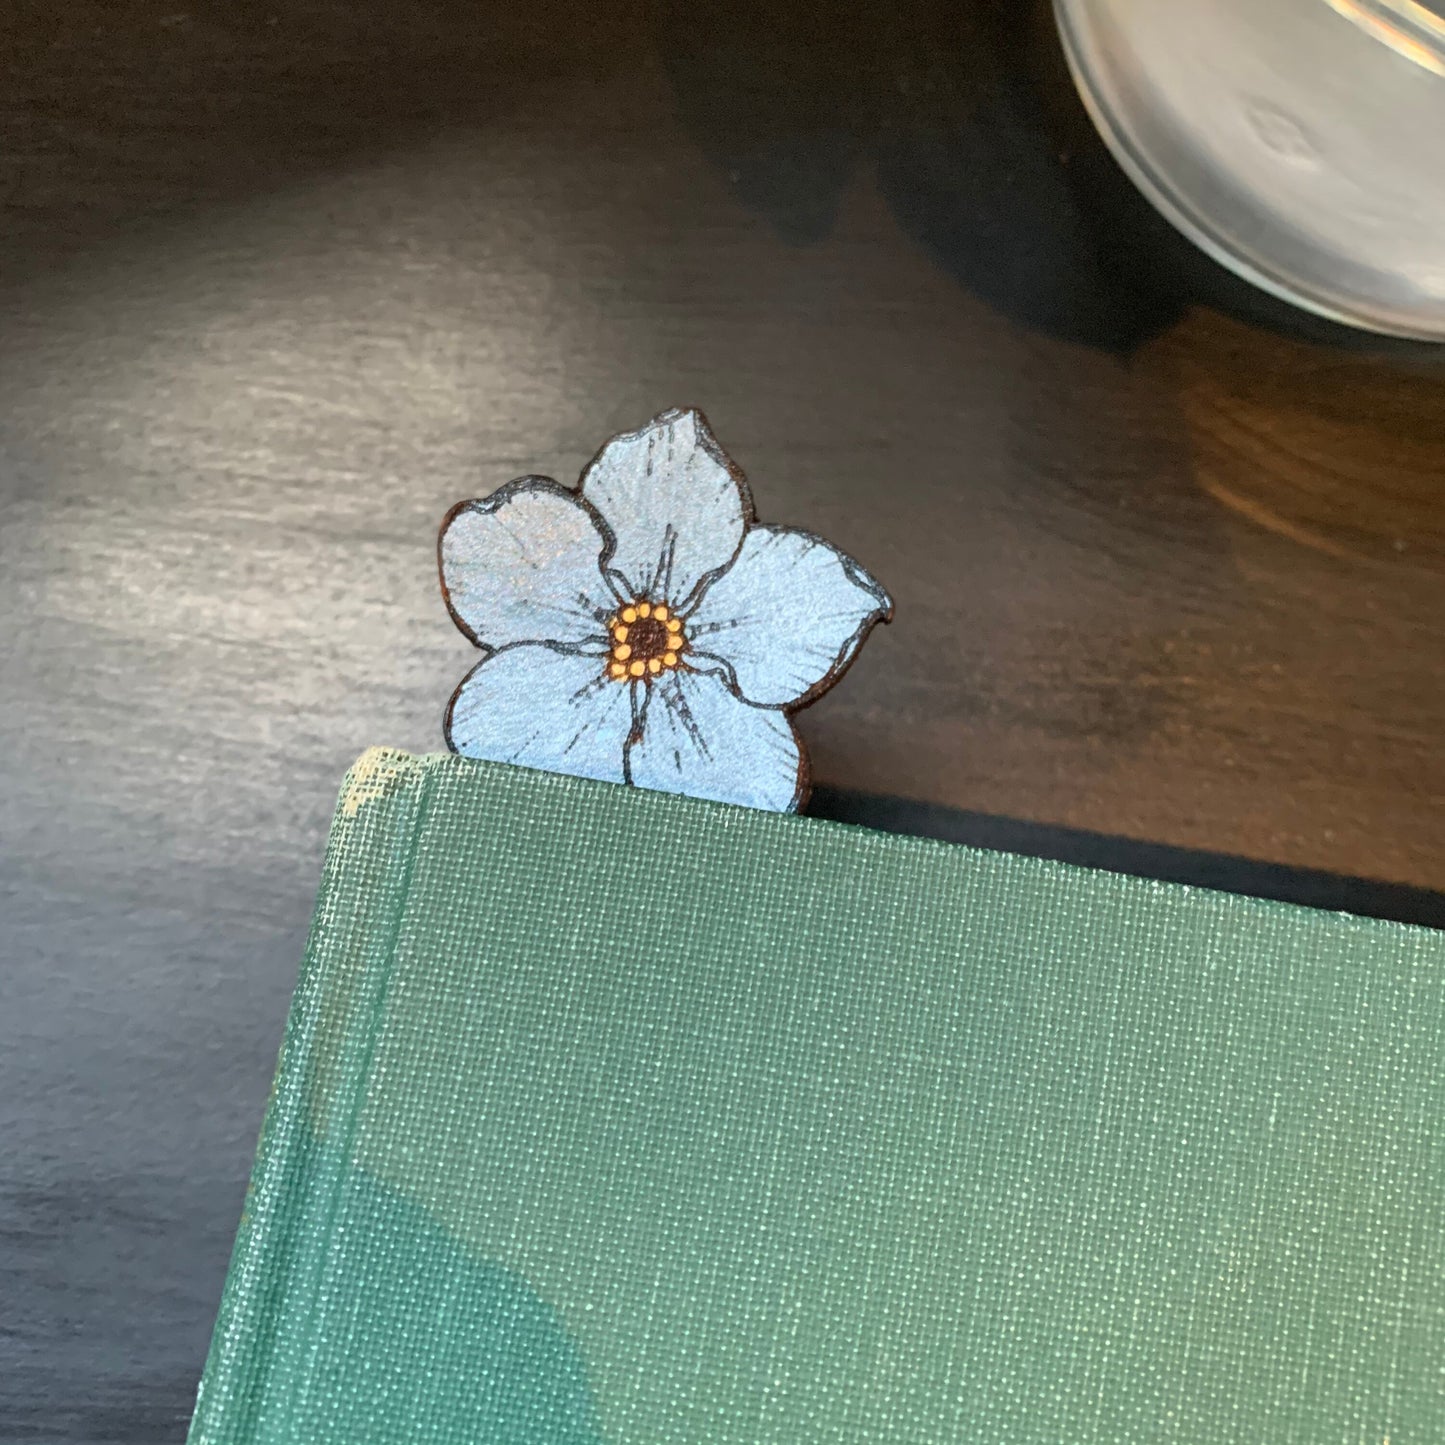 Forget Me Not Personalised Leather Bookmark